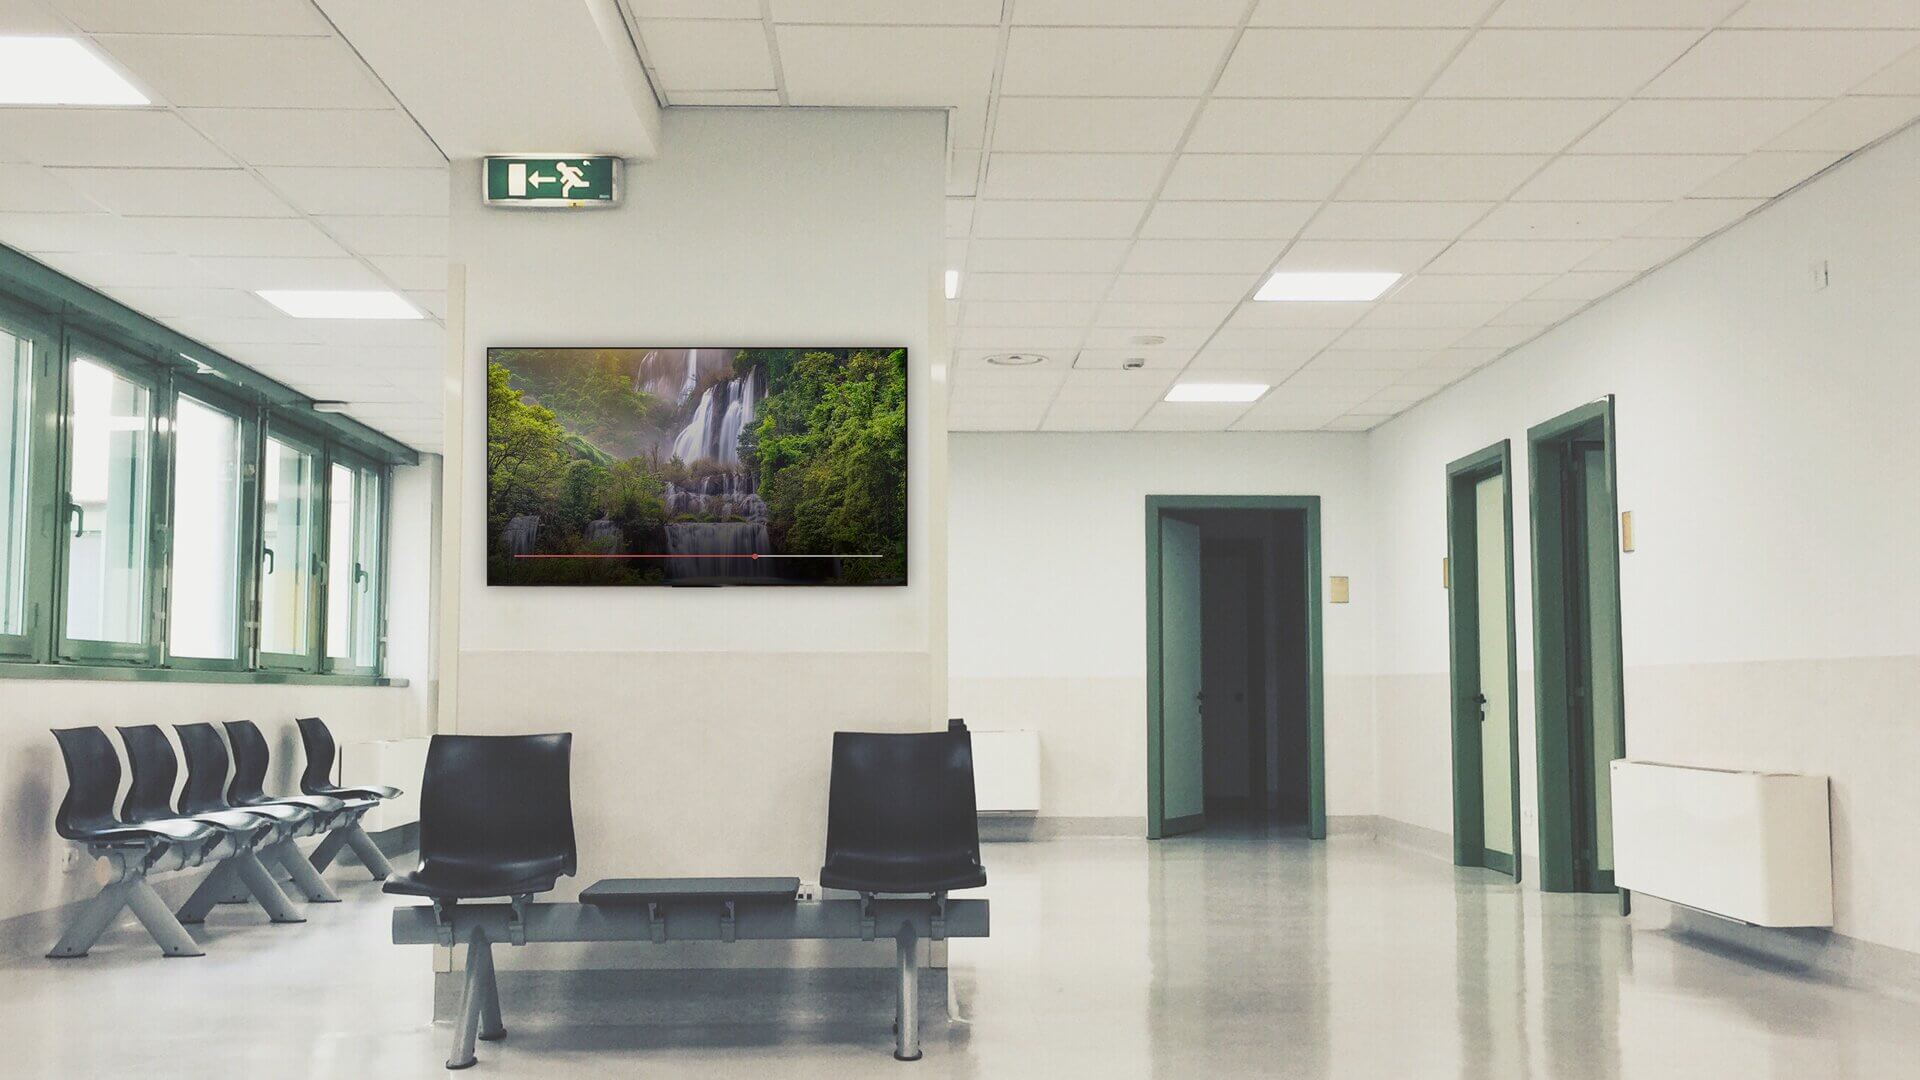 A digital screen installed in an empty hospital waiting room shows soothing visuals to enhance the patient experience.